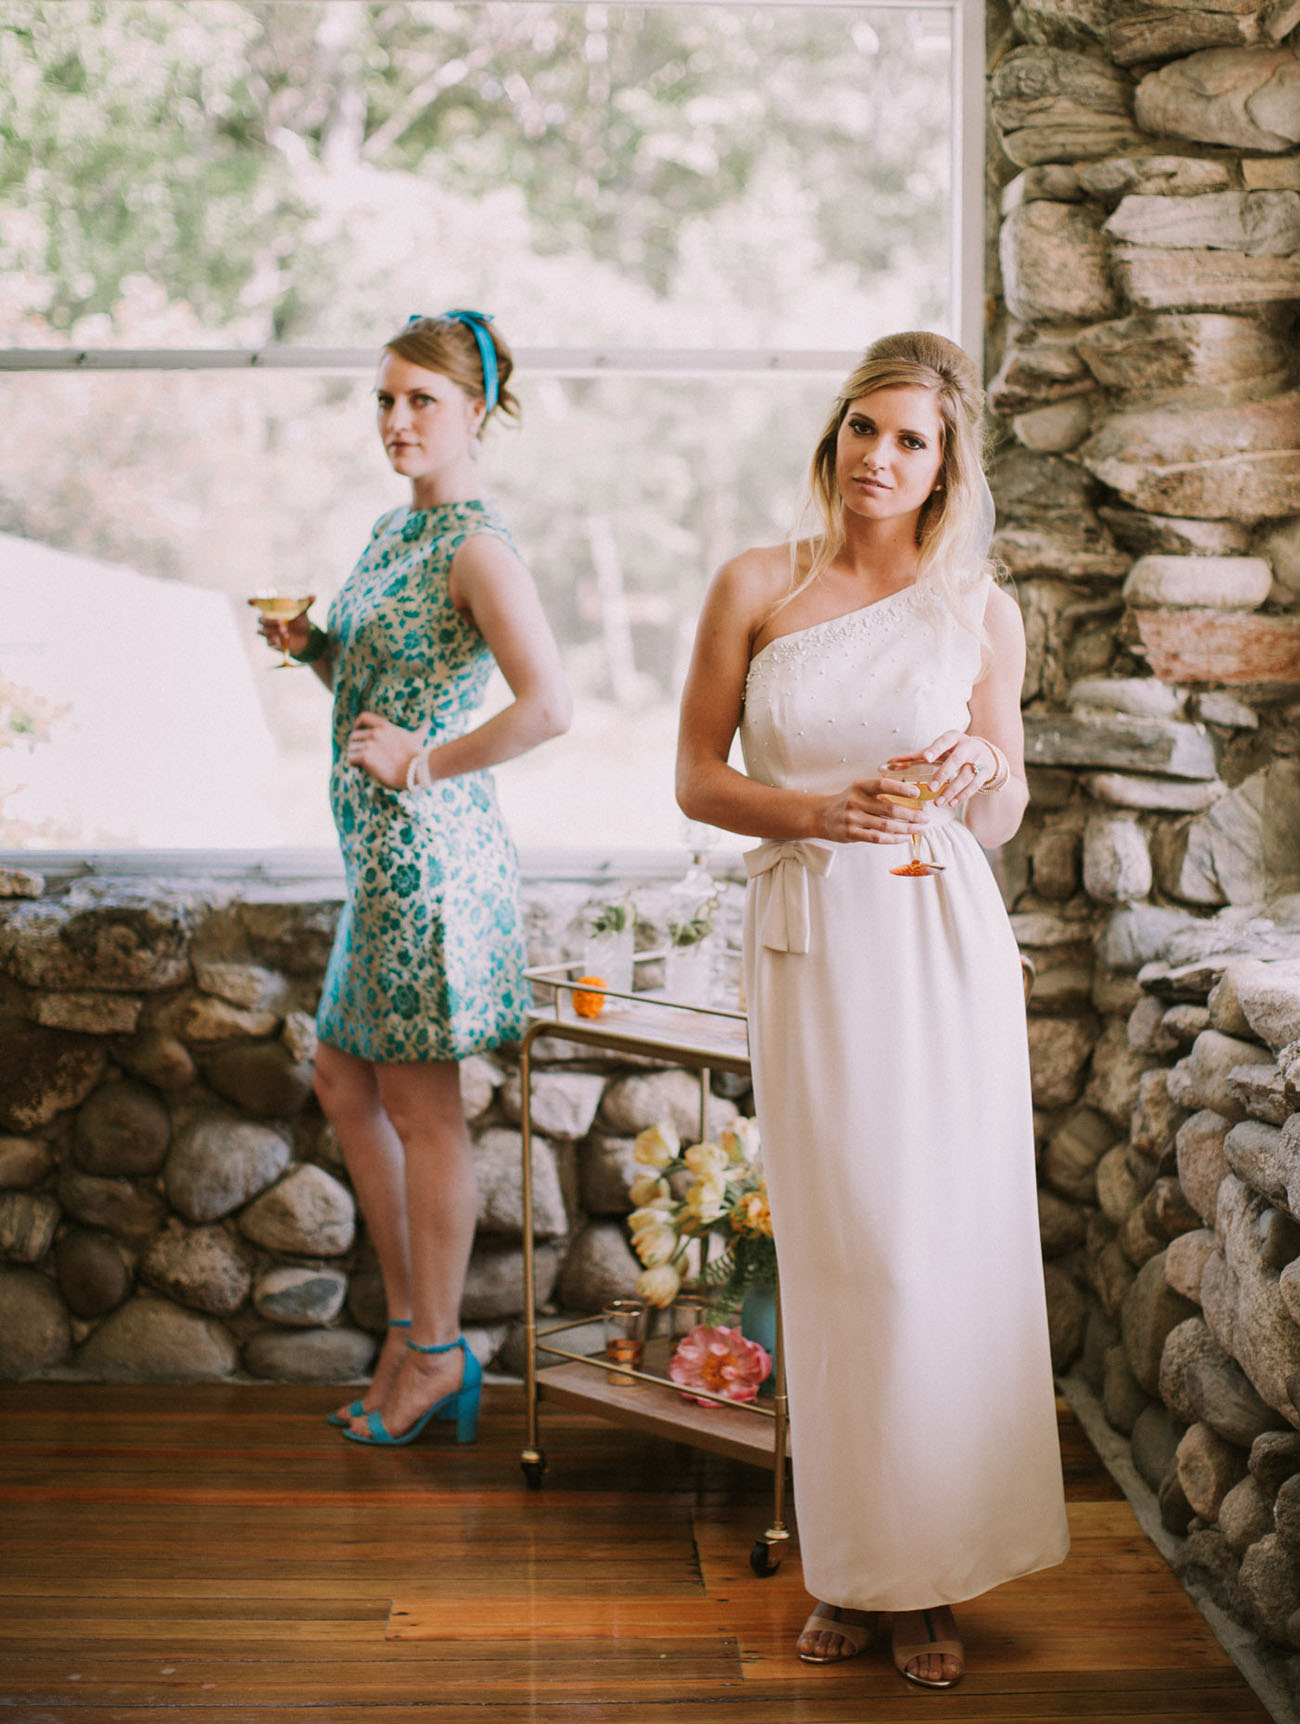 Cheers! Vintage 60s Cocktail Party Wedding Inspiration